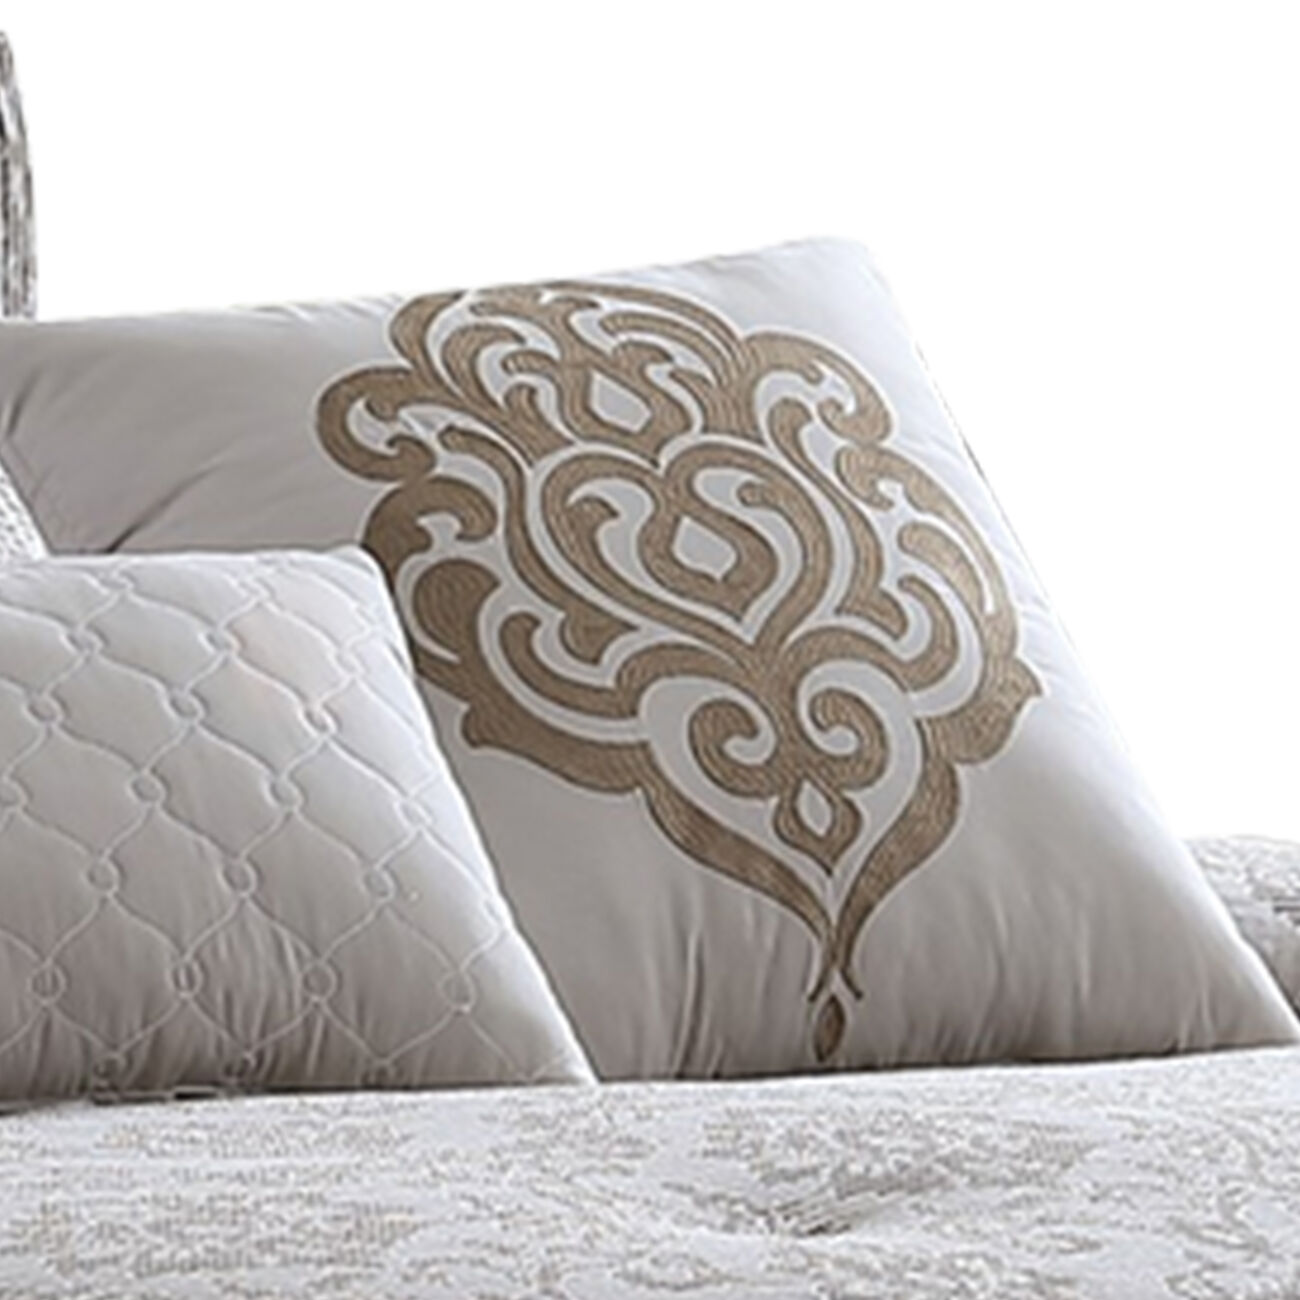 9 Piece Queen Cotton Comforter Set with Textured Floral Print, Gray